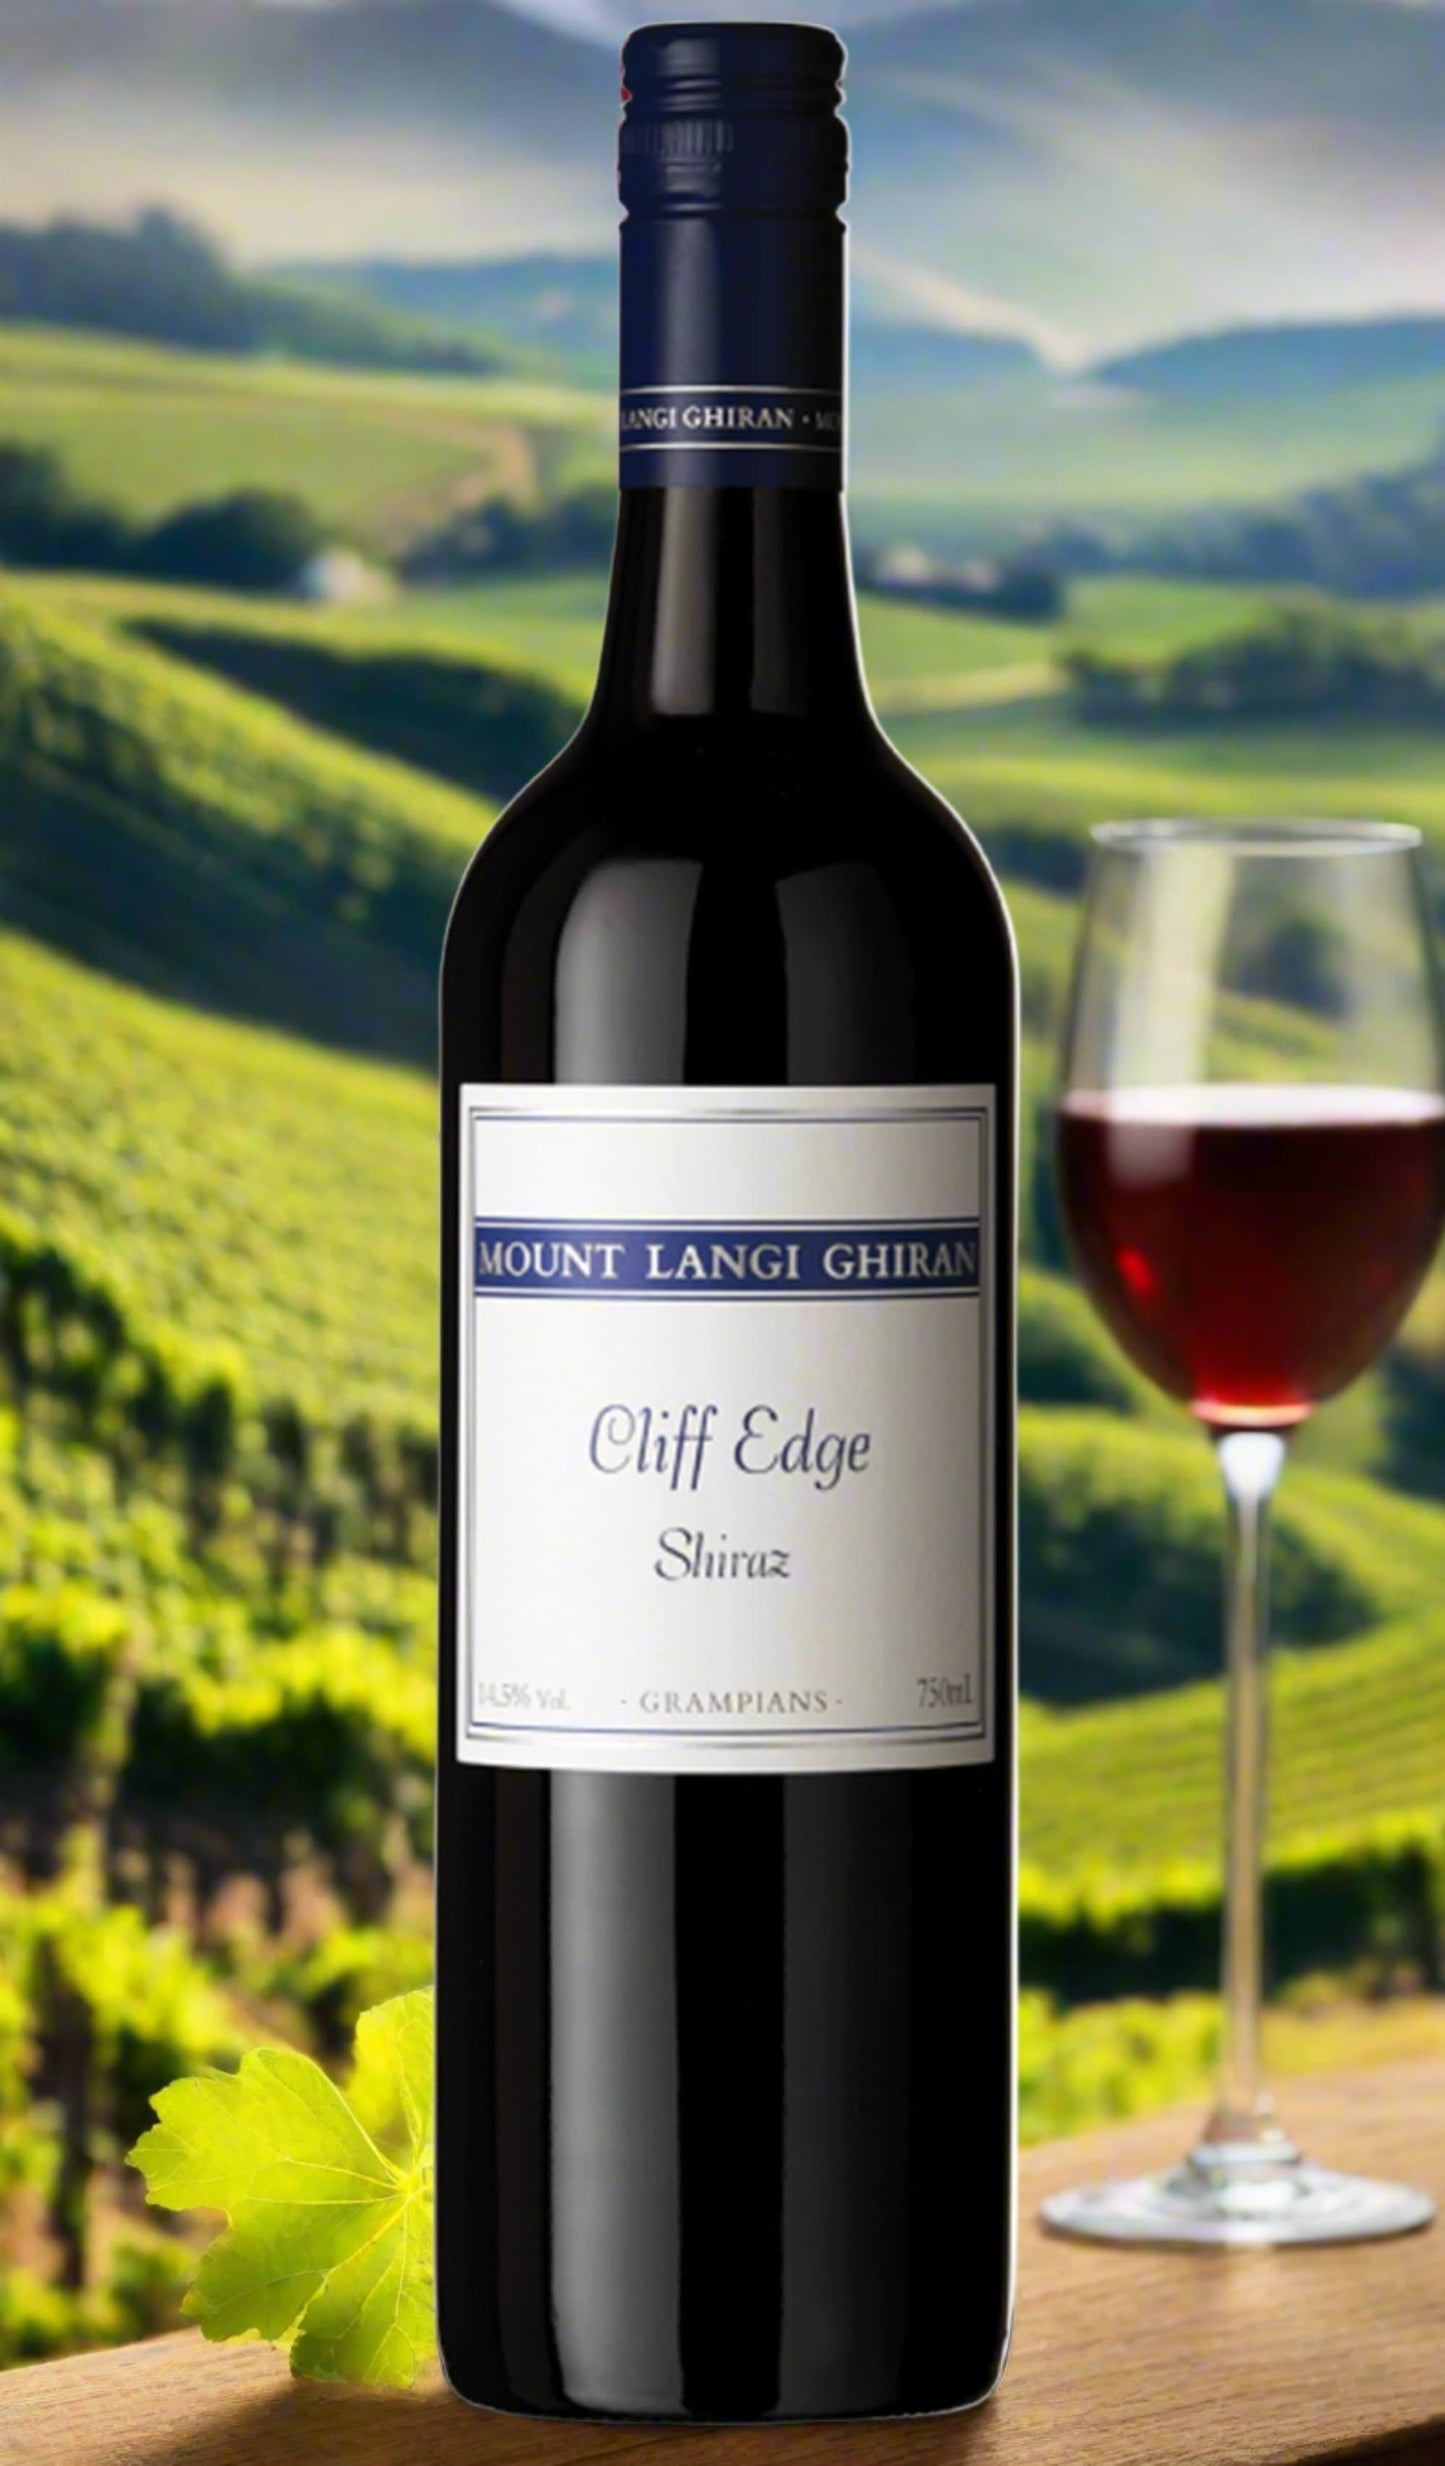 Find out more or buy Mount Langi Ghiran Cliff Edge Shiraz 2021 (Grampians) online at Wine Sellers Direct - Australia’s independent liquor specialists.